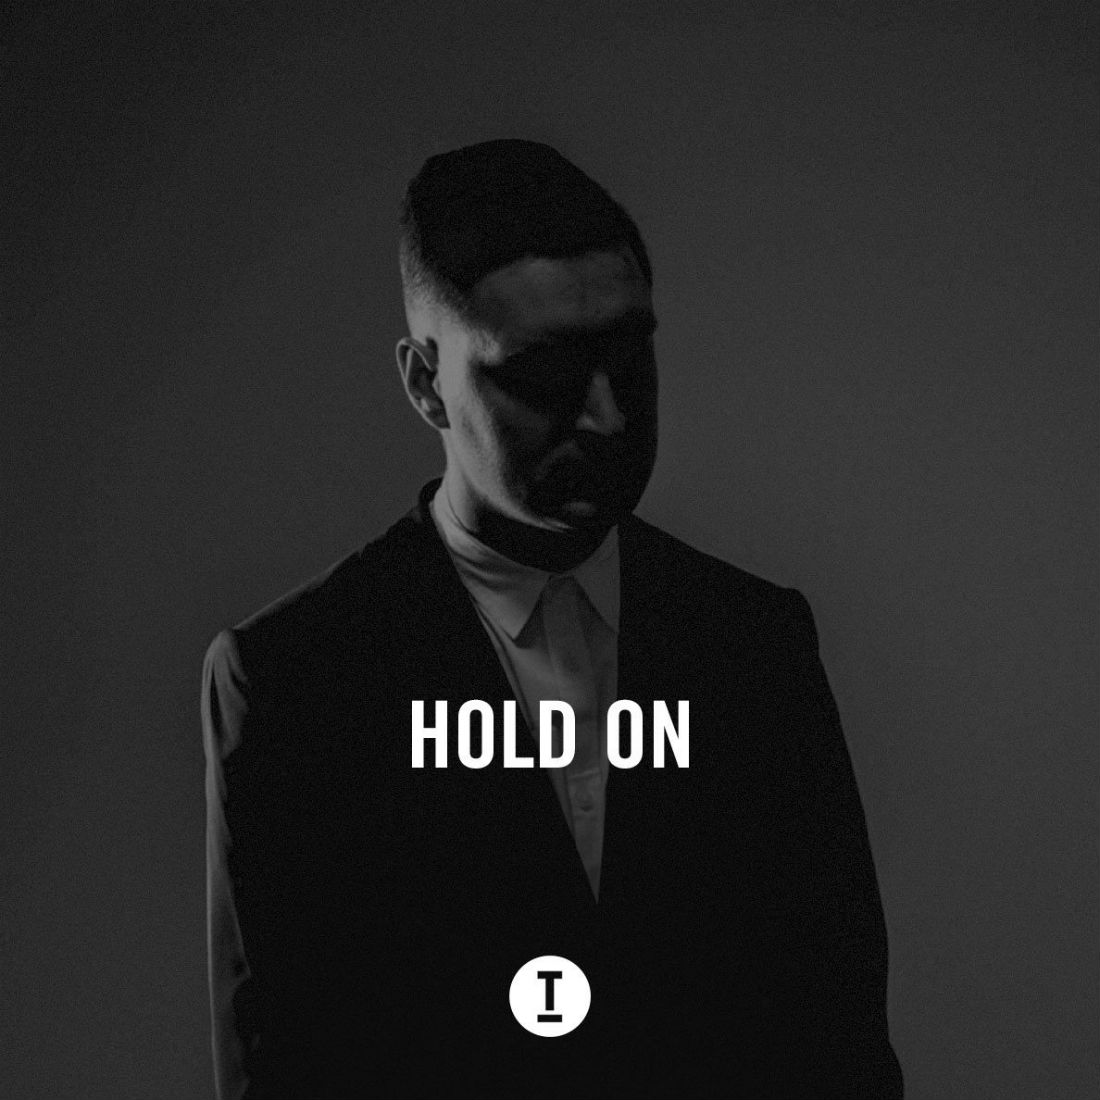 Amtrac - Holding On